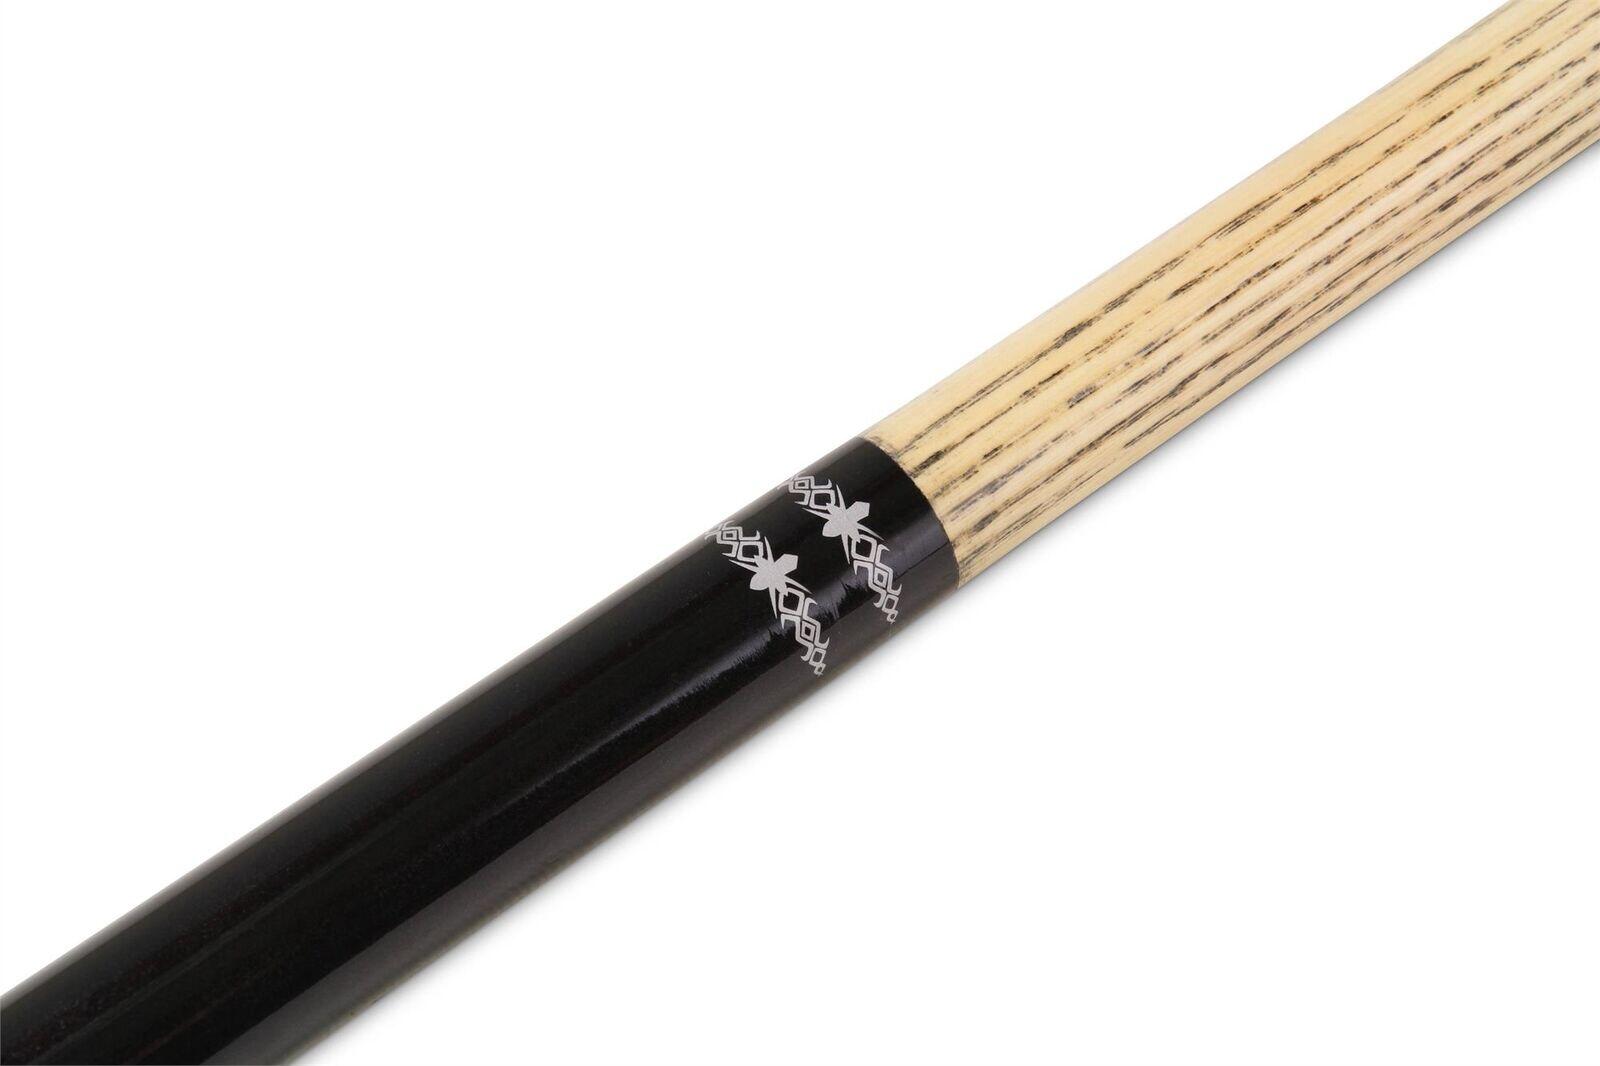 Jonny 8 Ball BLACK SCORPION 2pc Centre Joint Ash Snooker Pool Cue with 9mm Tip 4/6